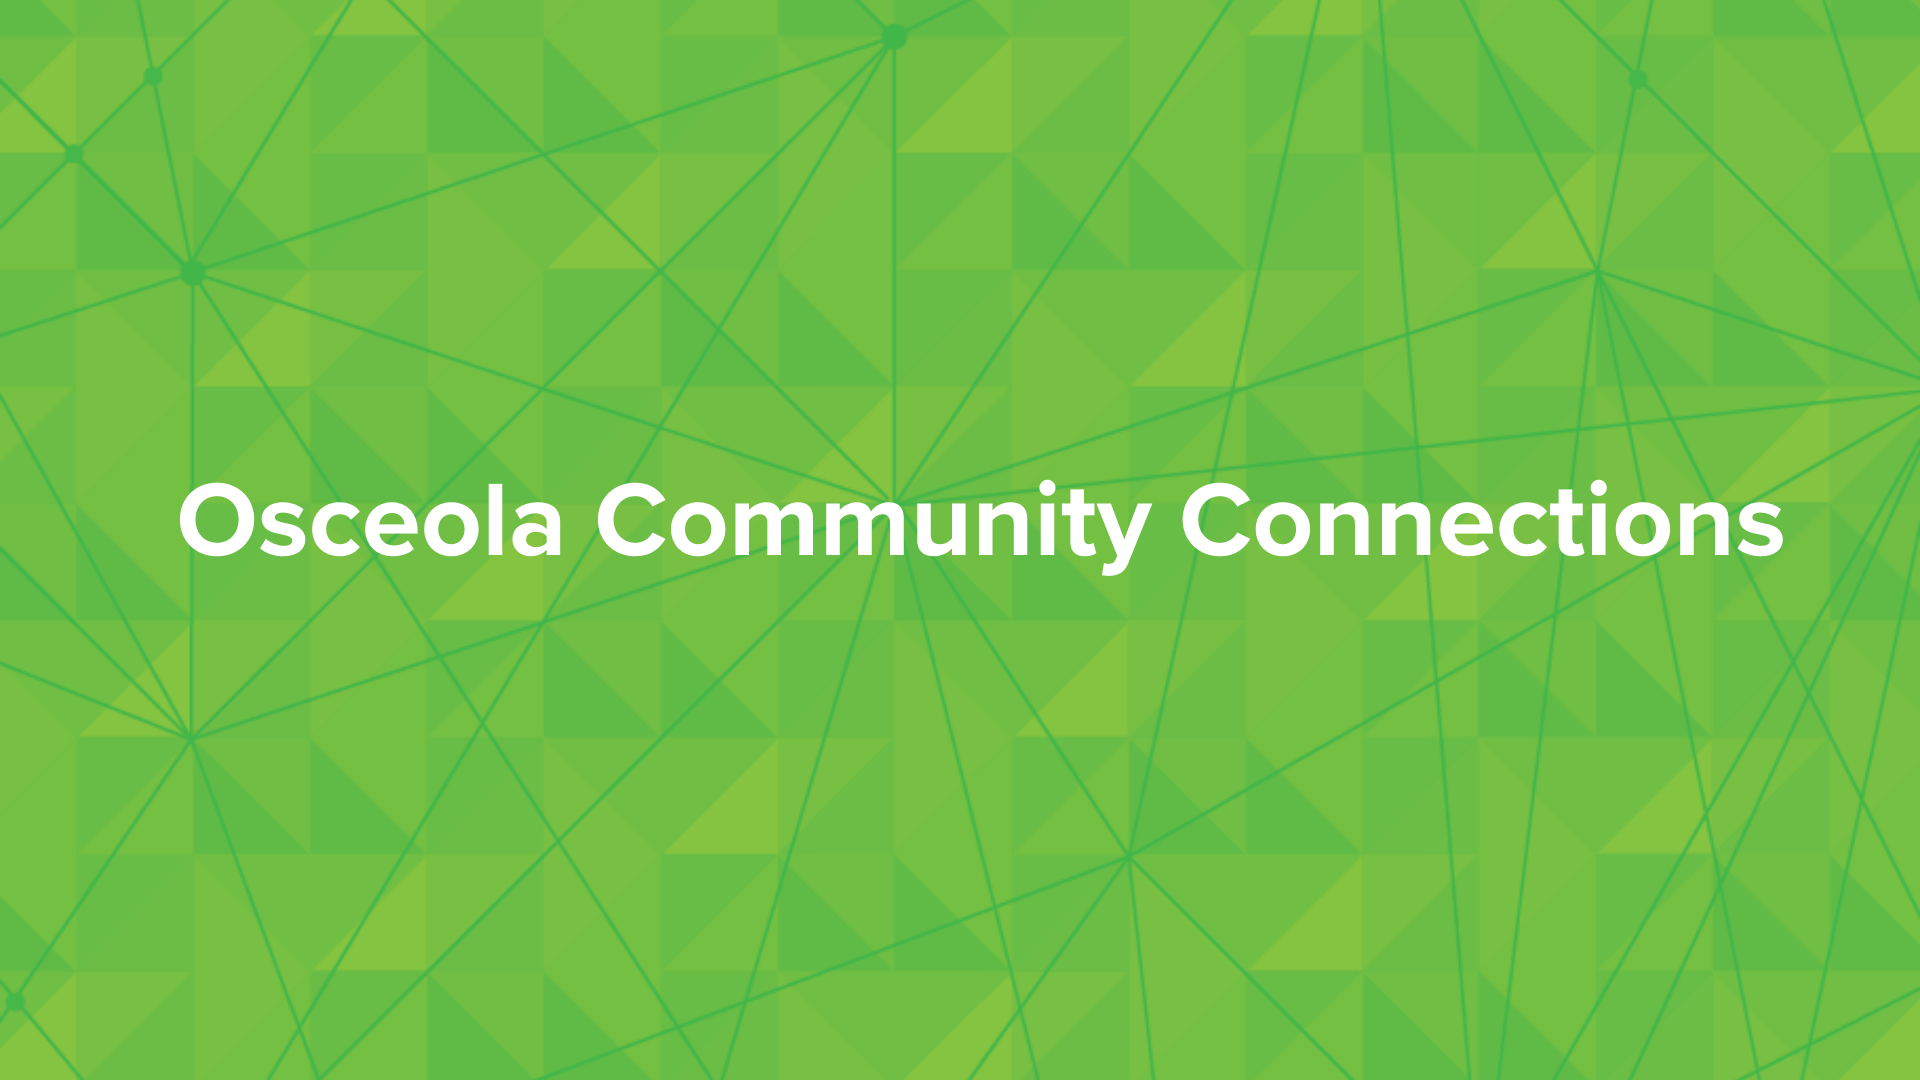 "Osceola Community Connections" green background